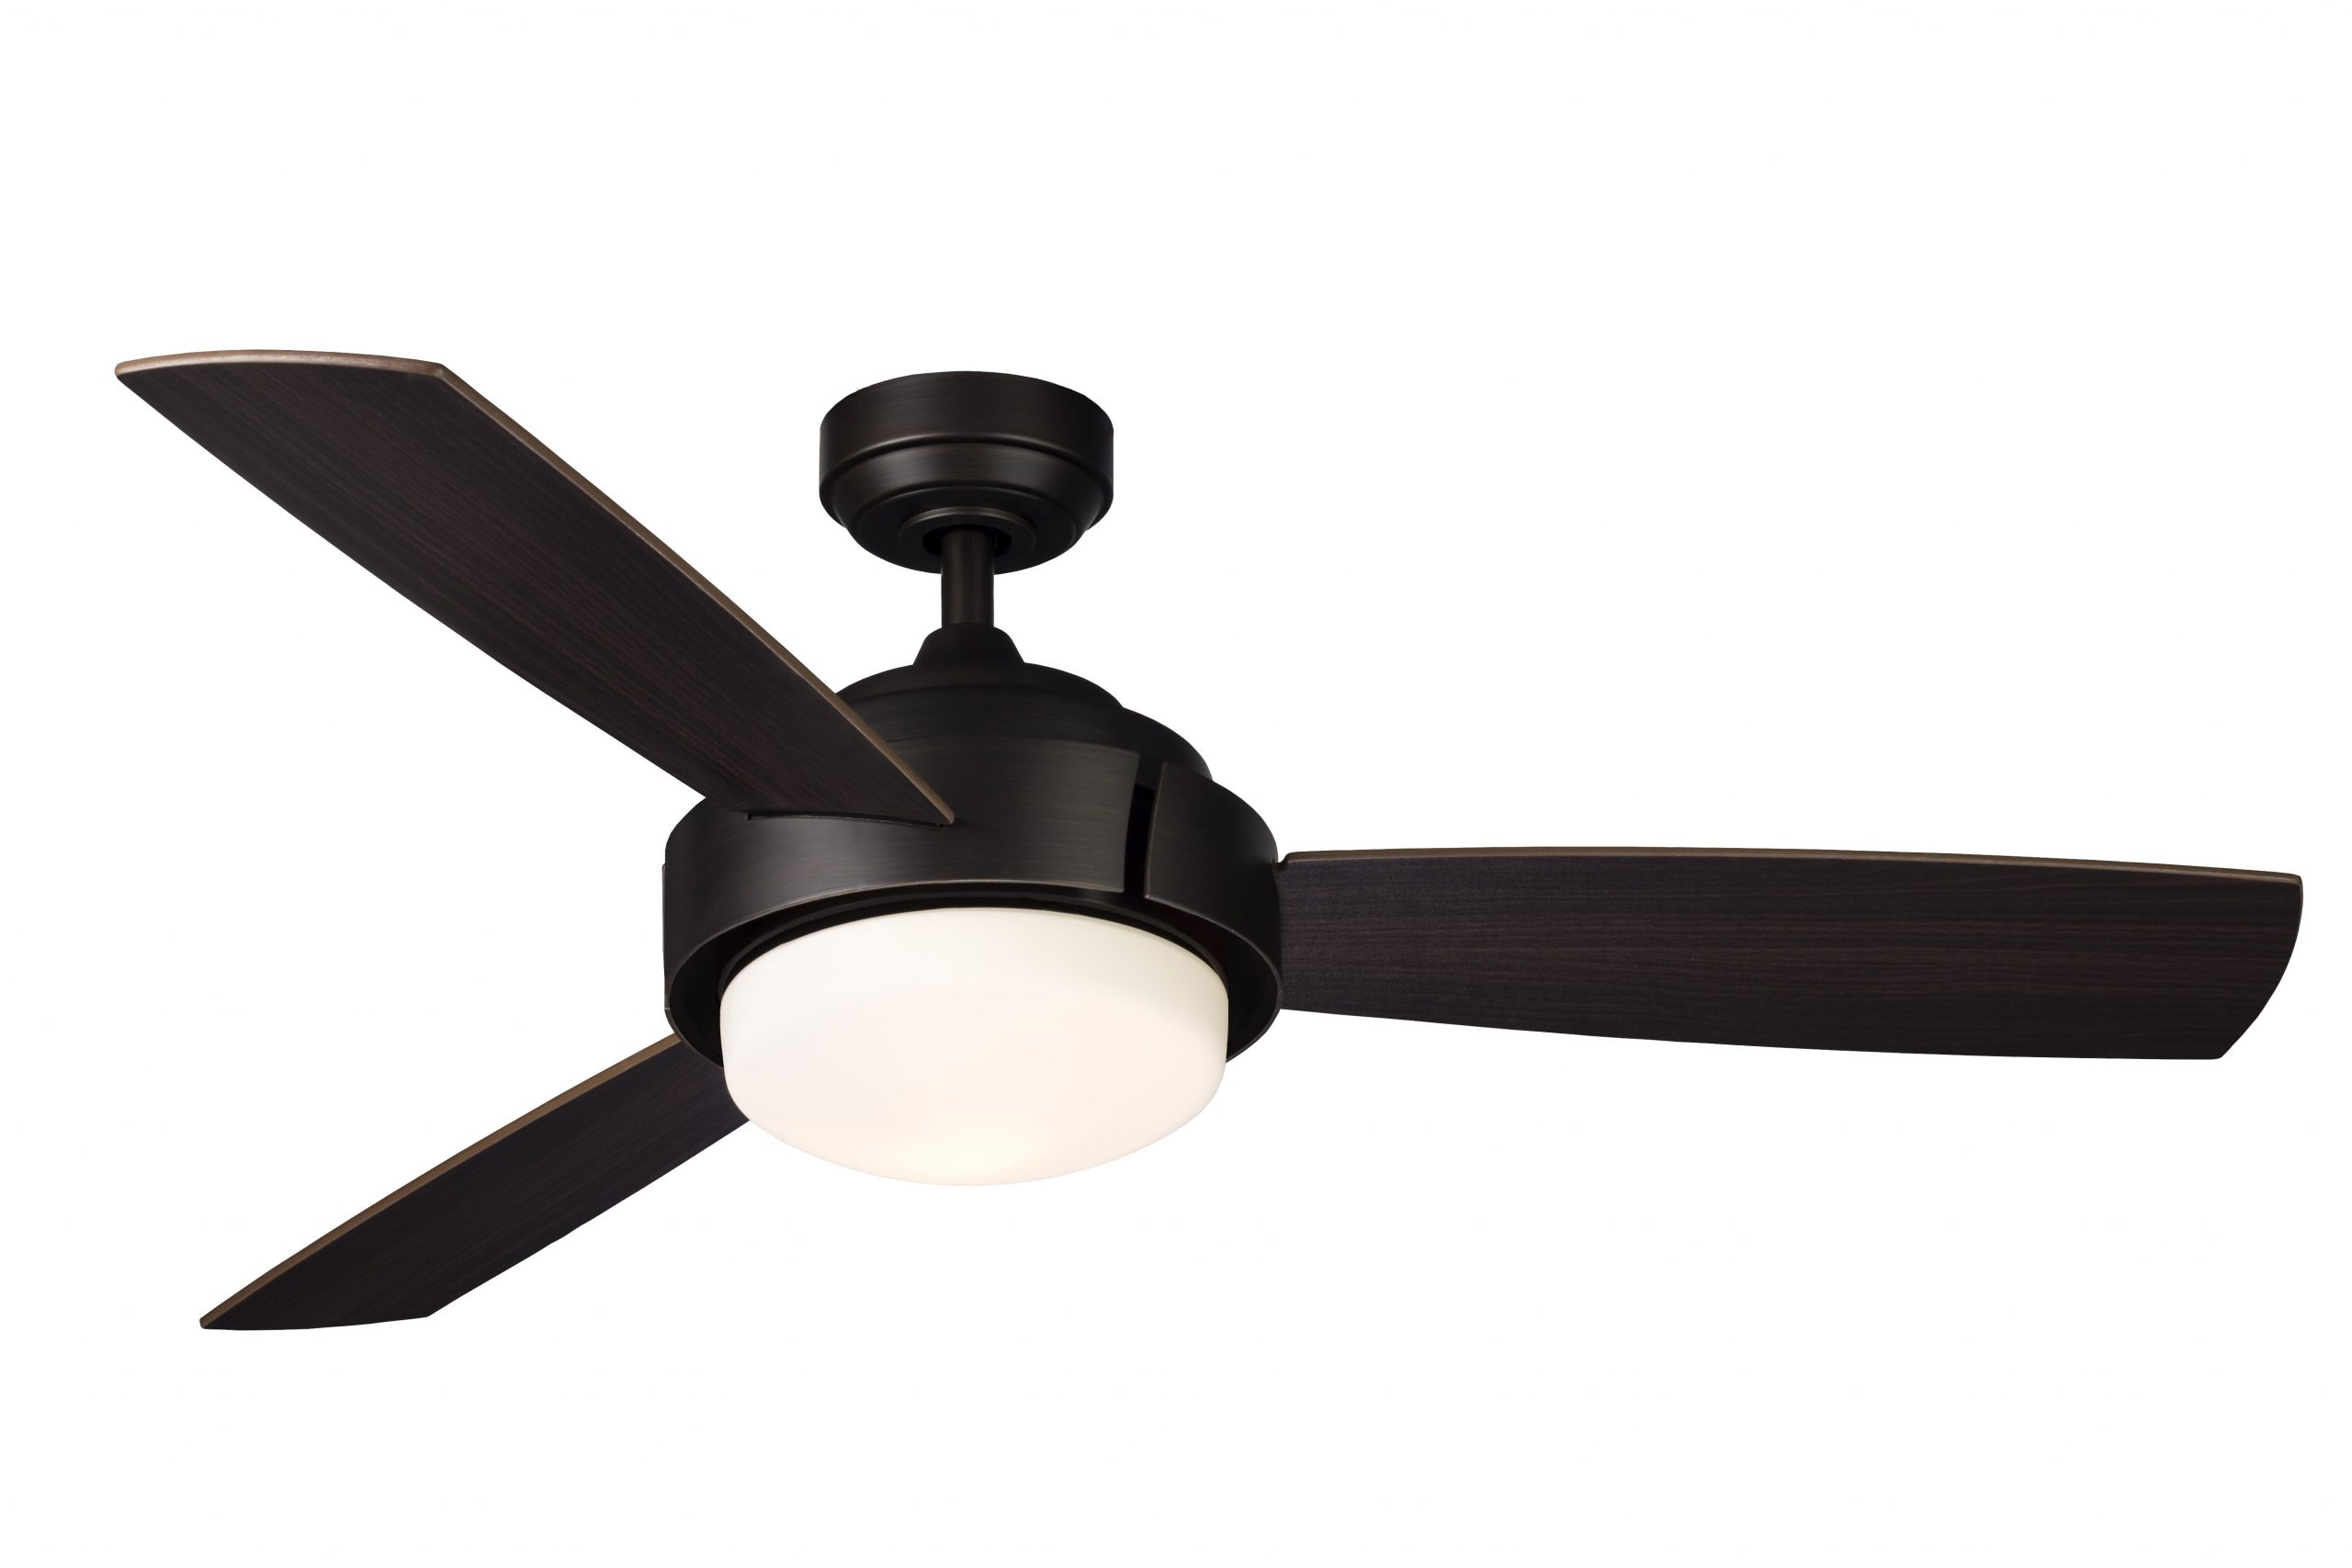 52 Tabitha 3 Blade Ceiling Fan With Light Kit with sizing 5315 X 3543